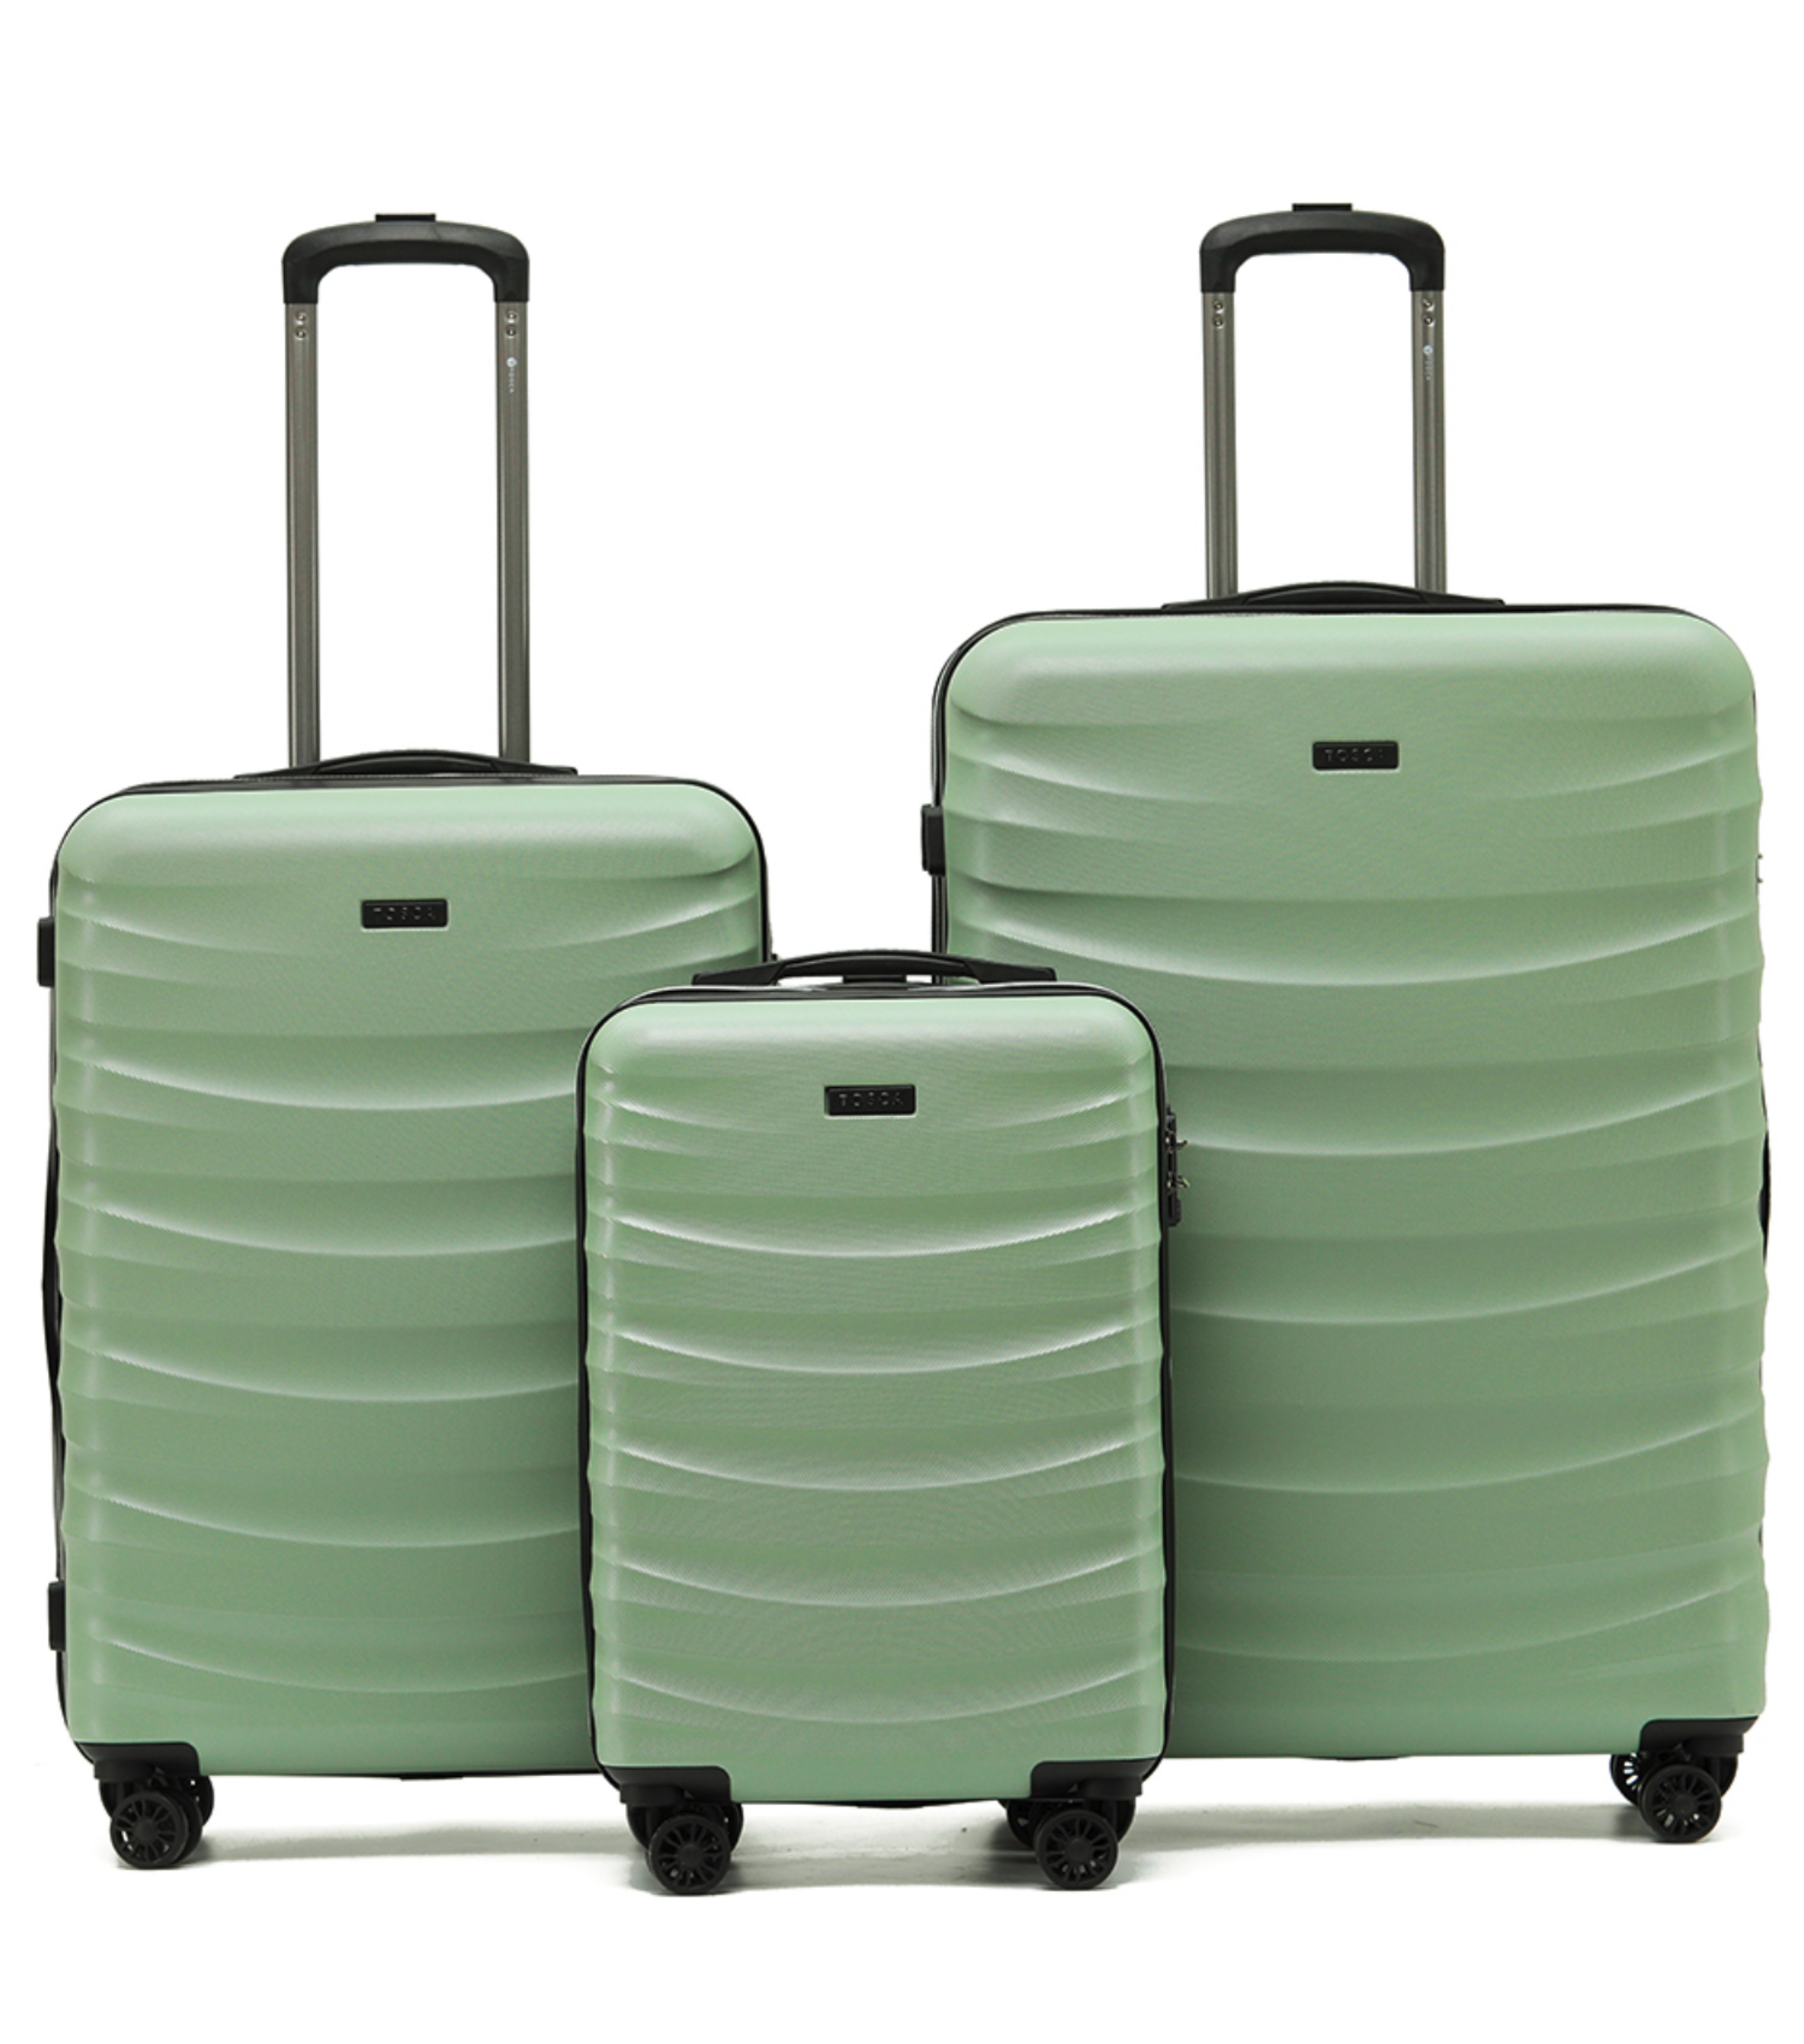 Tosca Interstellar 4-Wheel Expandable Luggage Set of 3 - Green (Small ...